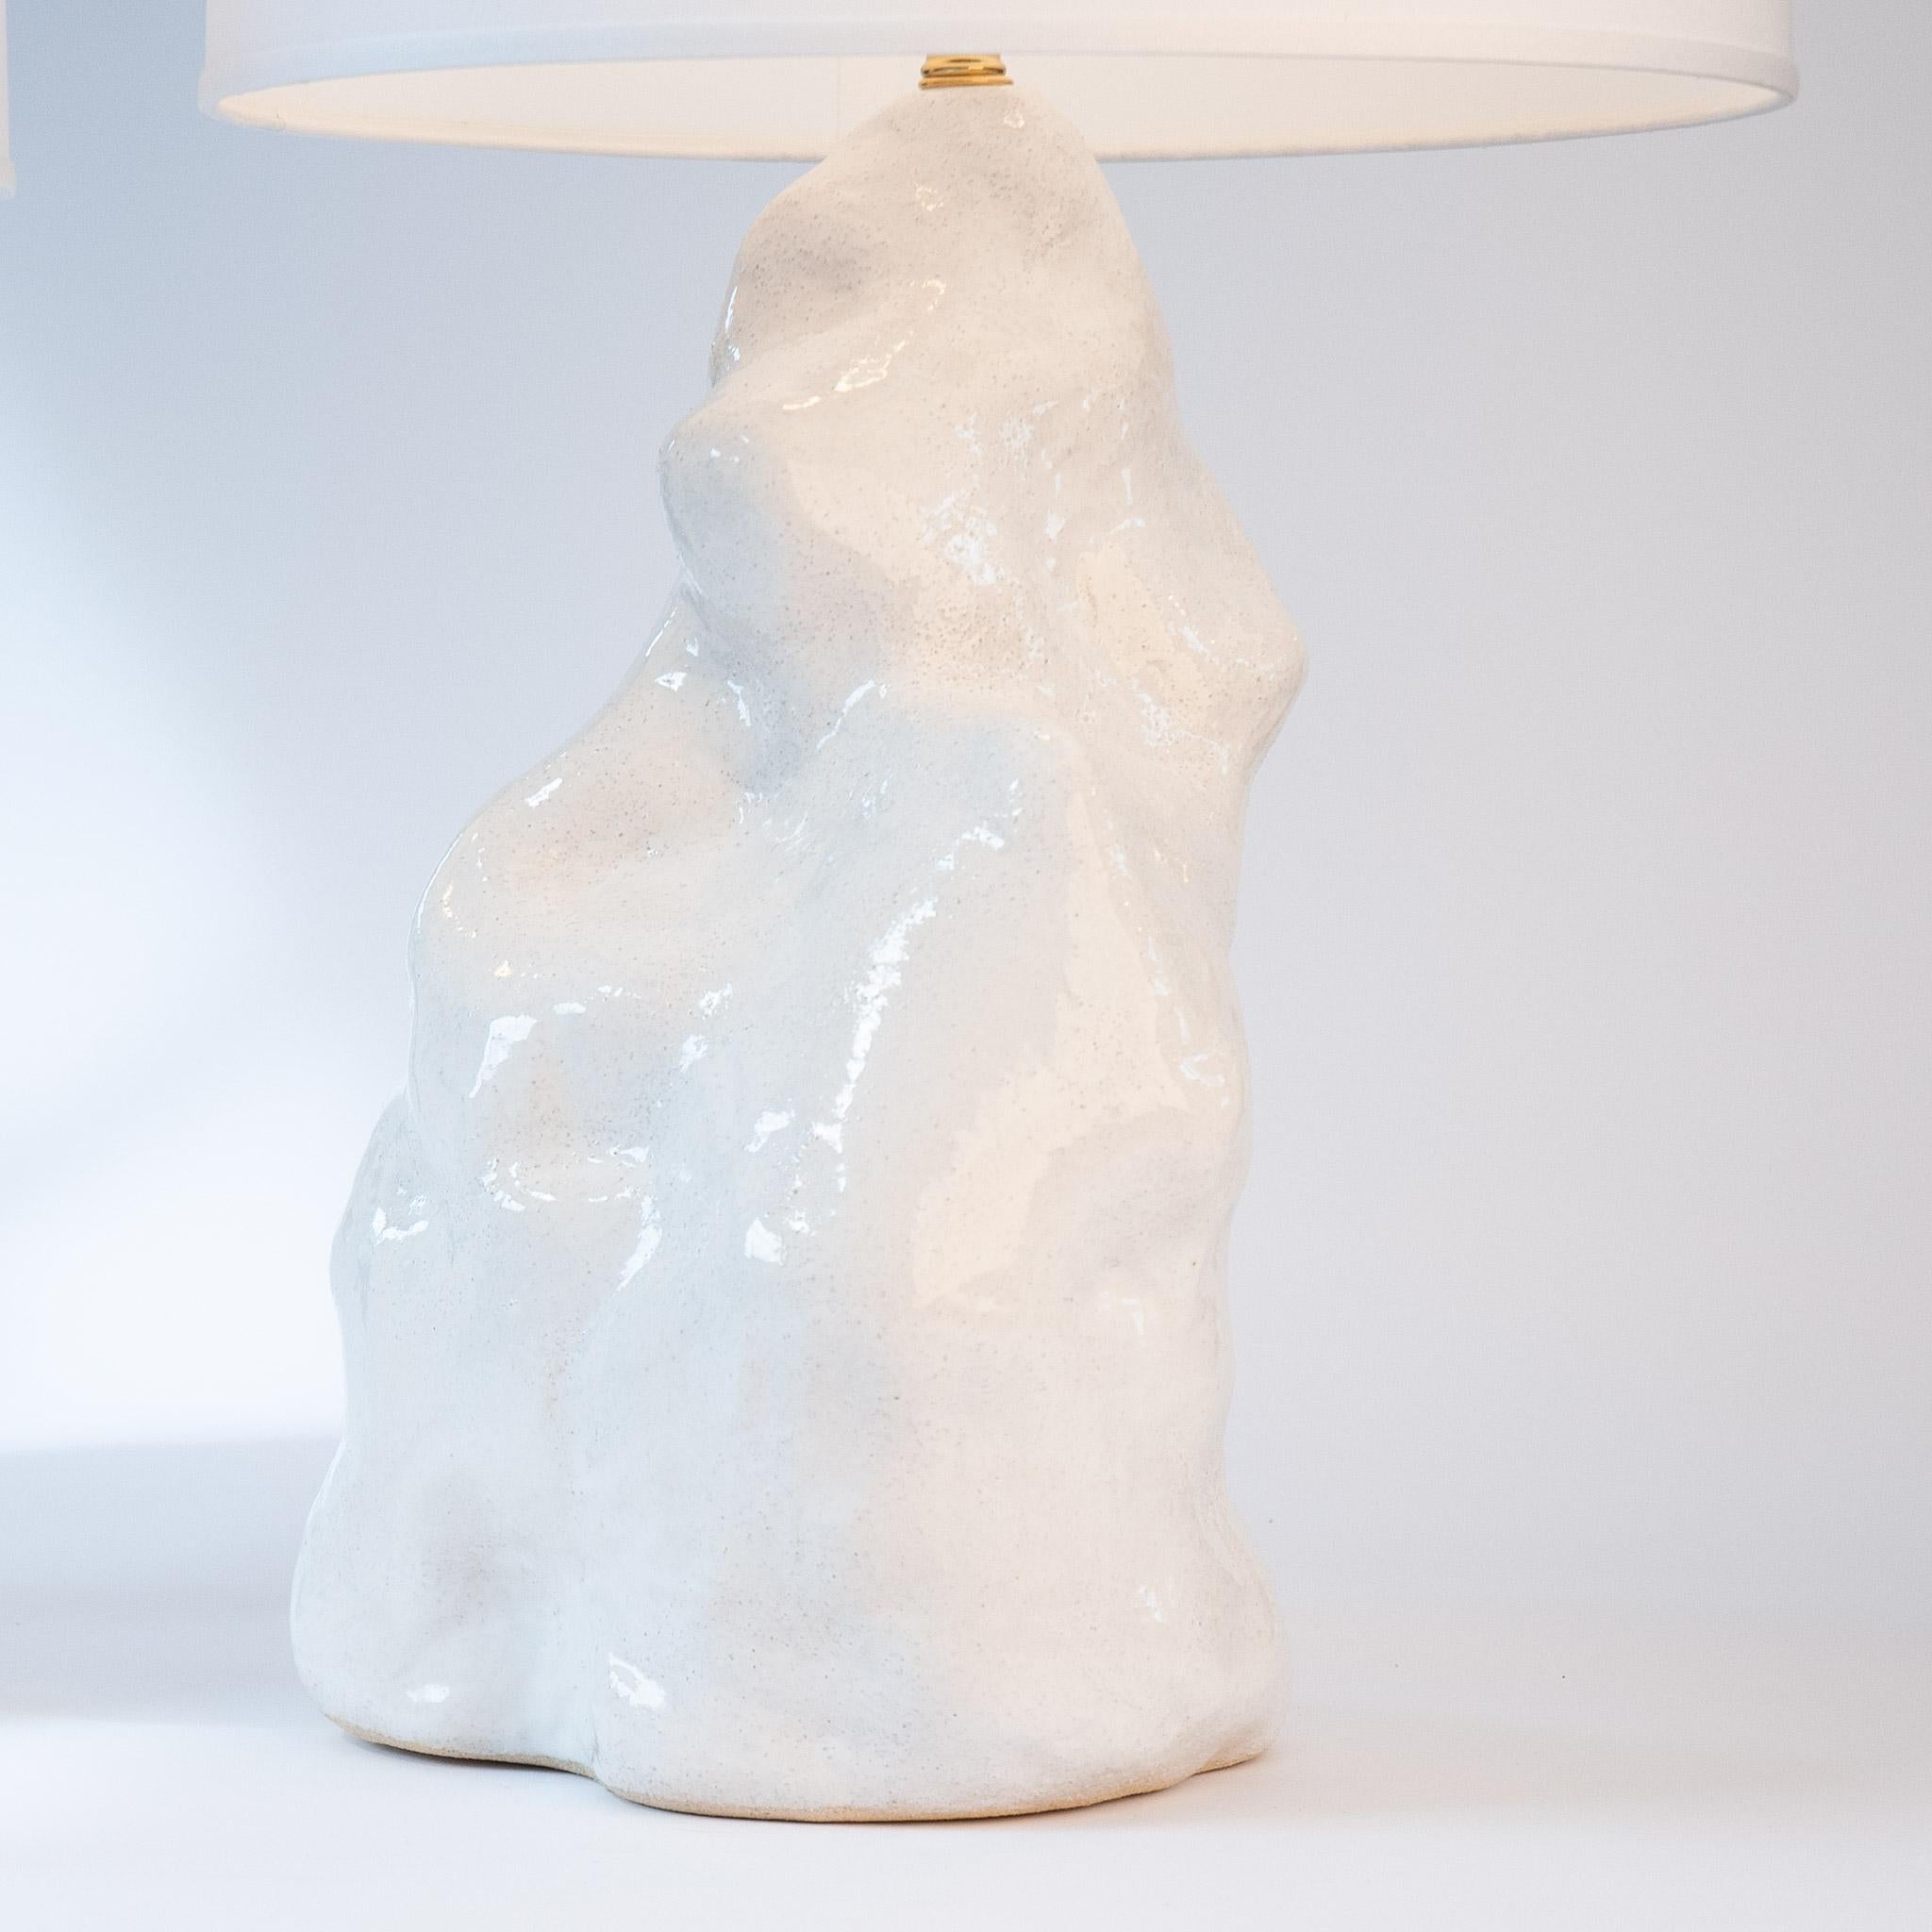 Contemporary J Schatz Studio 2018 White Amorphous Table Lamp, Pair, One of a Kind For Sale